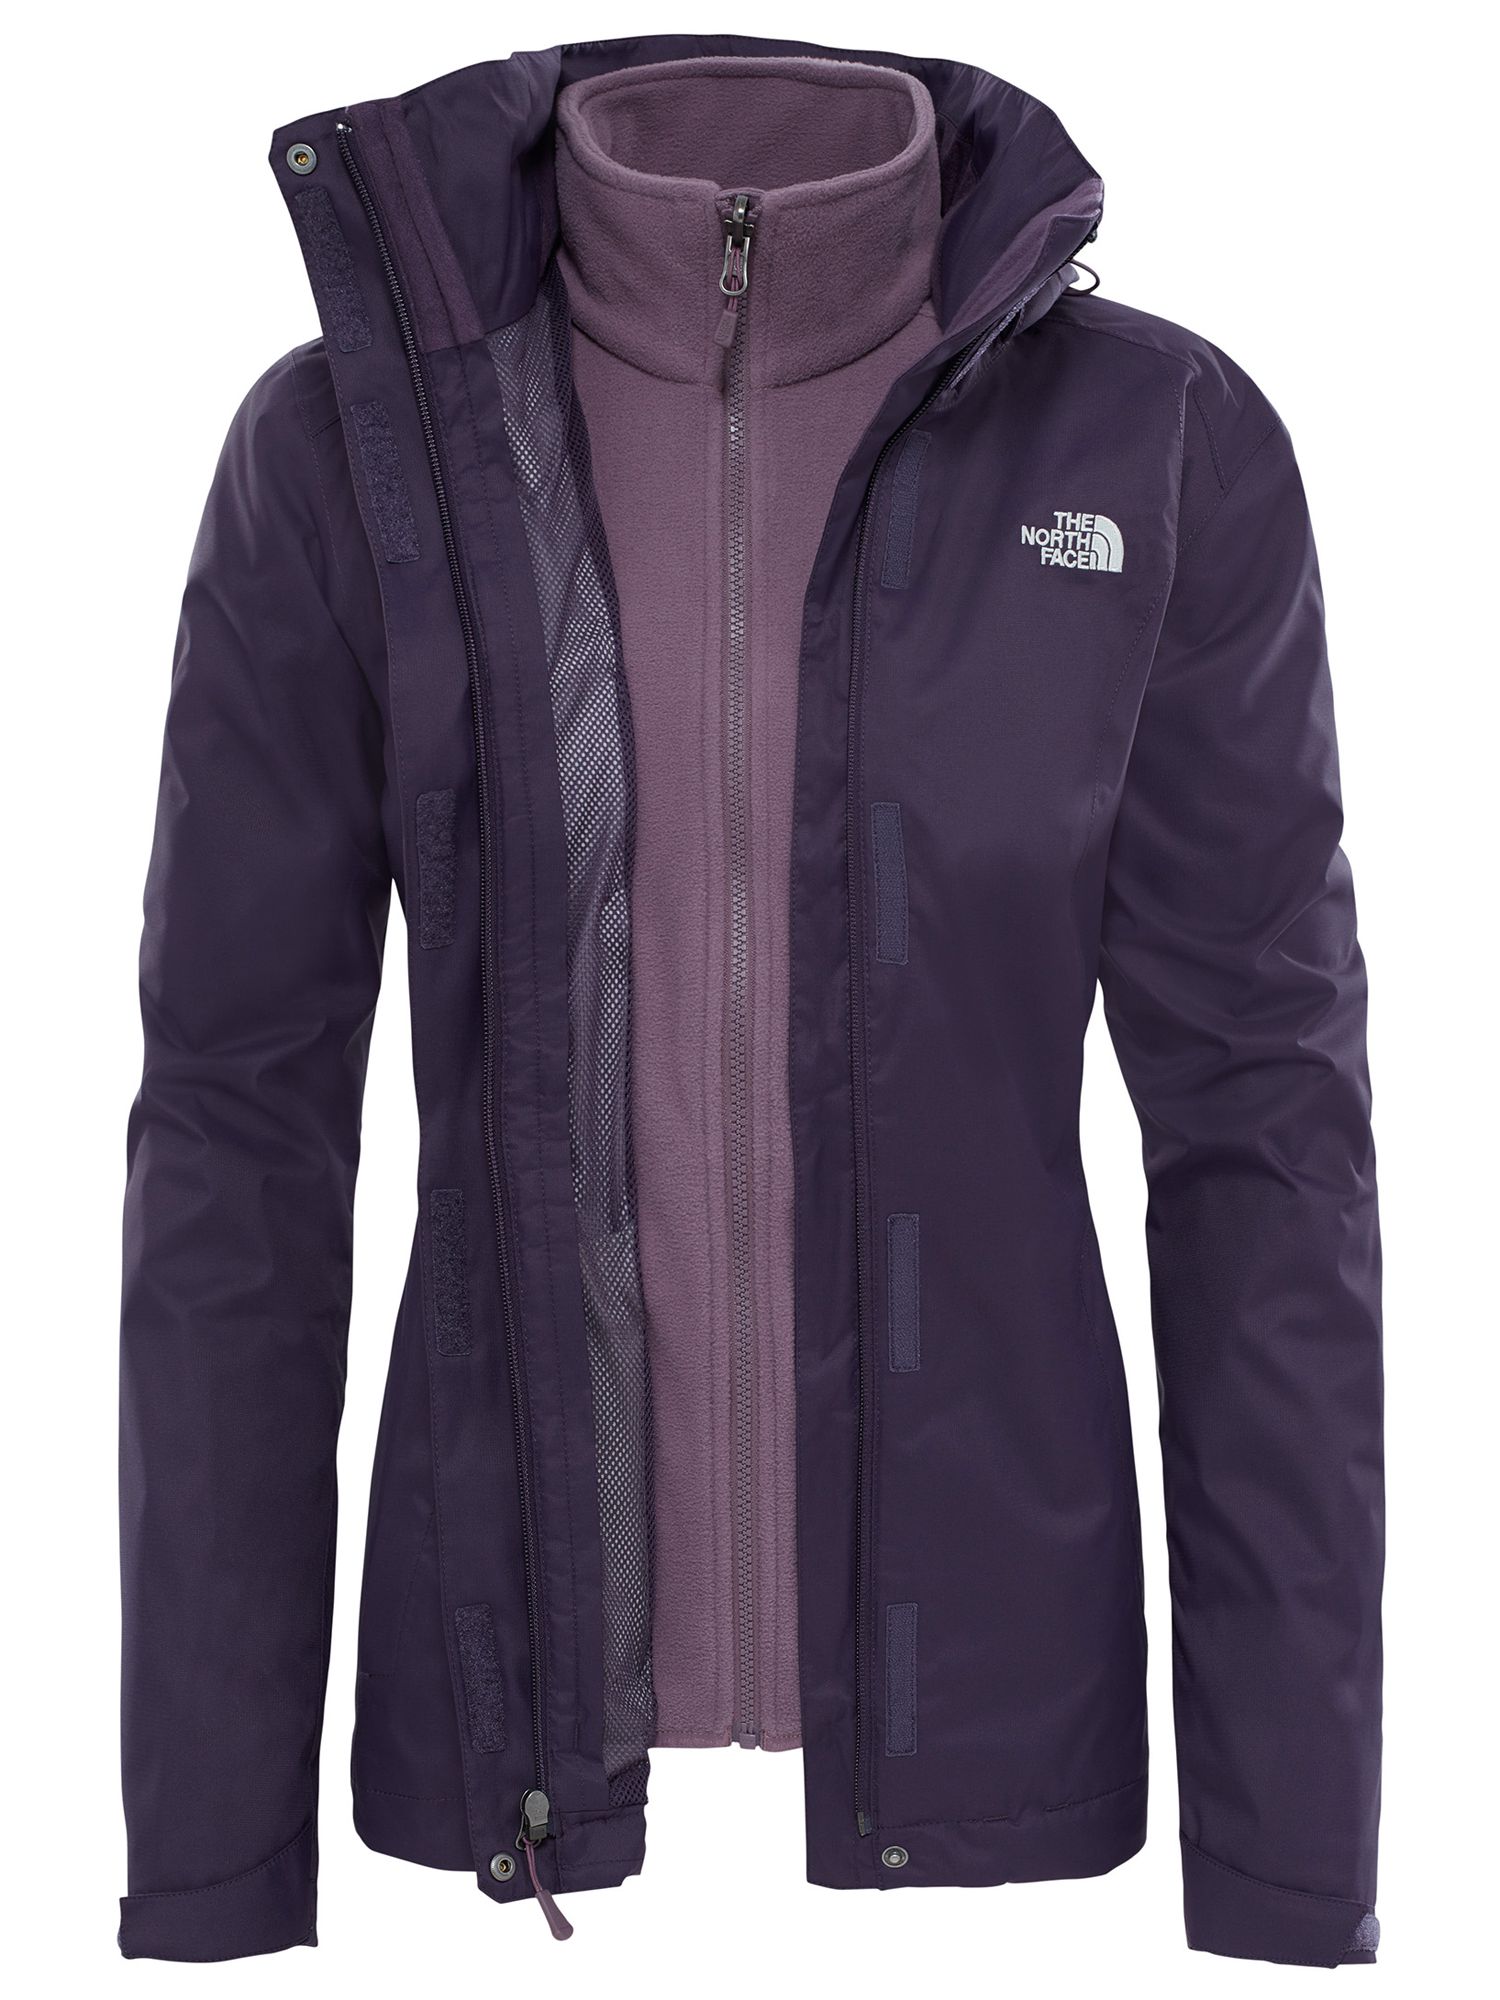 THE NORTH FACE HyVent 3 in 1 Jacket Waterproof Shell with Fleece Aqua  Women's S